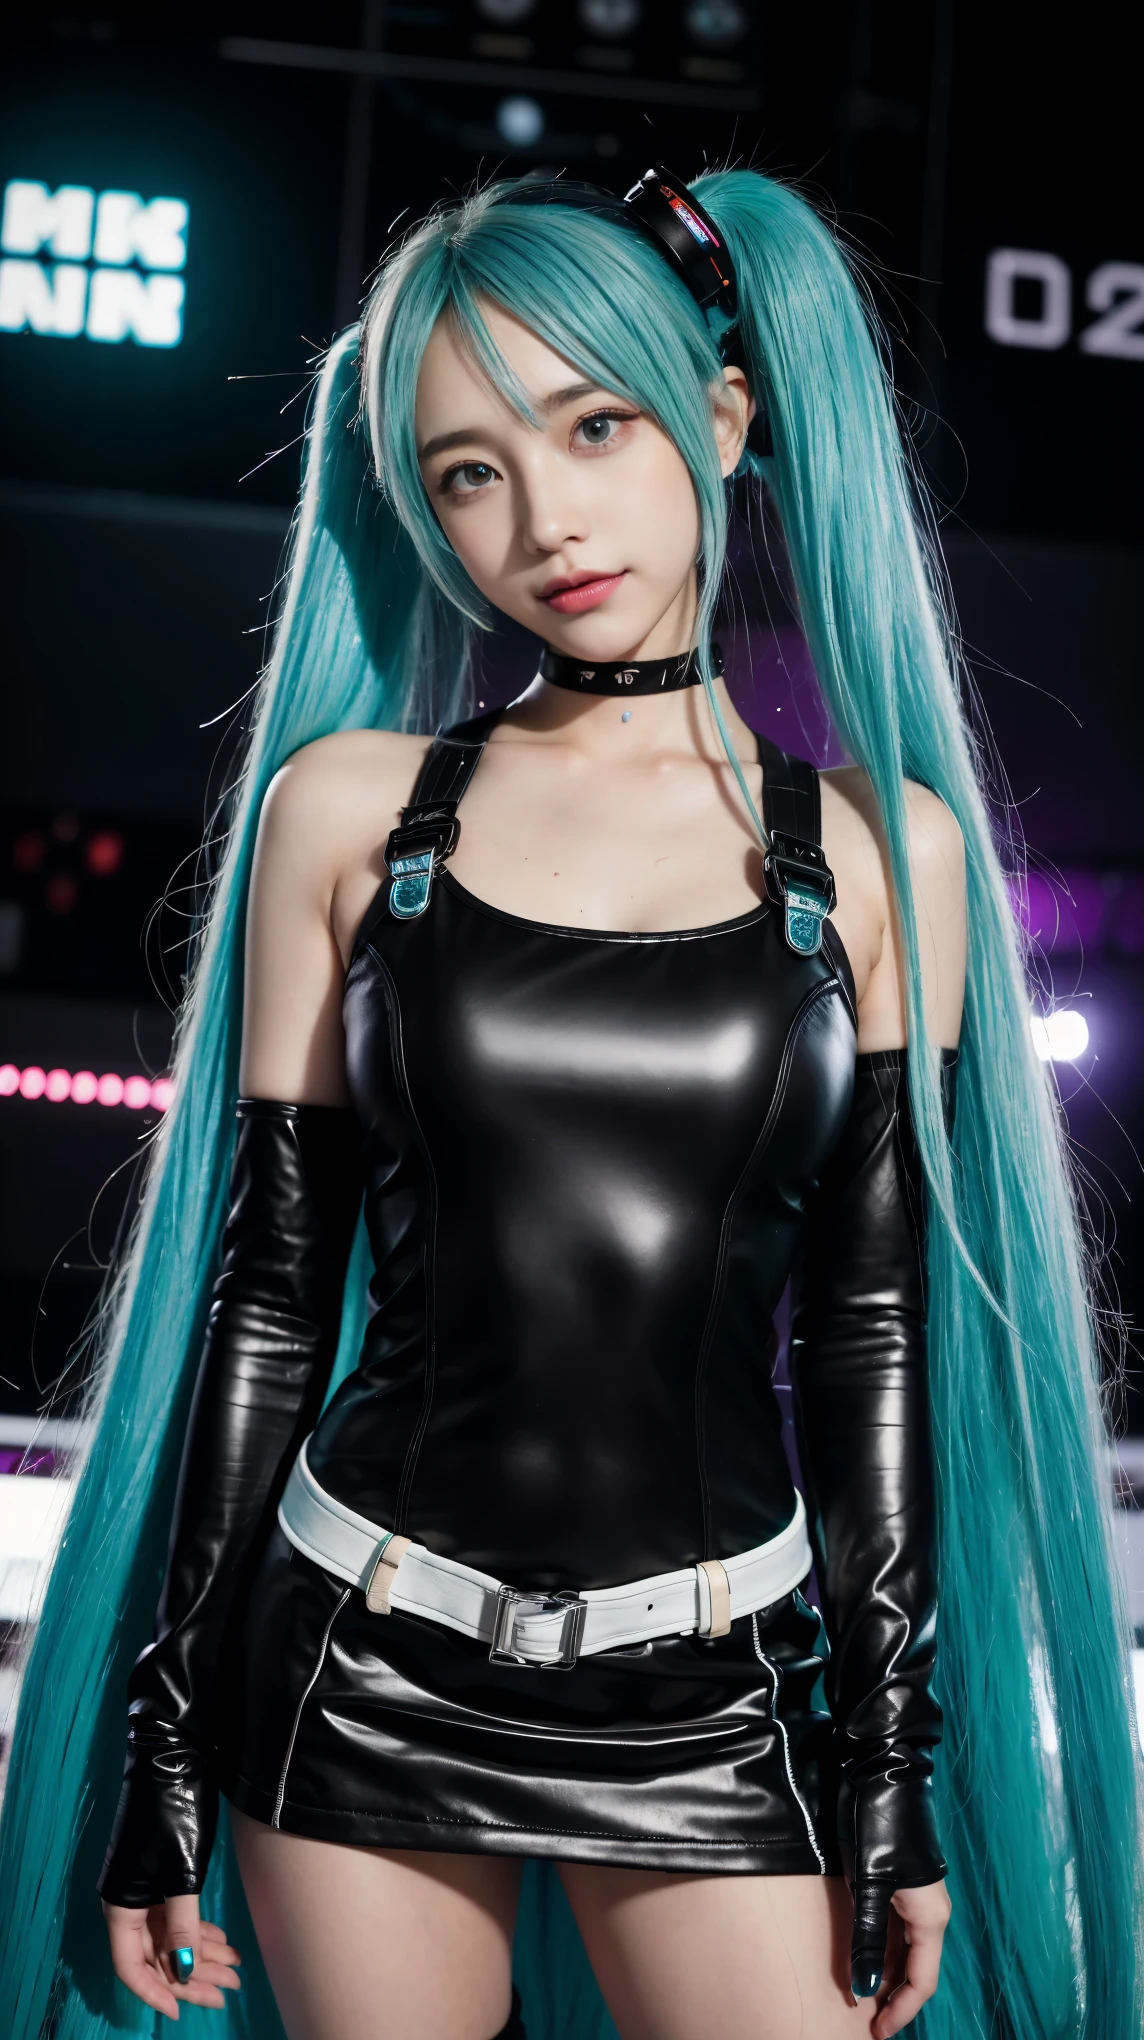 best quality， High resolution， Big breasts hatsune miku， expressive， mascara， Black T-shirt and， black skirt， lace pantyhose， High shoes， concert， Black Television Stations， guitar， studio， amplifier， messy room， electrical cables， night， choker necklace， Nipple piercing， dark eyeliner， dark eye makeup， Pale complexion， accessories using nails， Wristband， Complex fundamentals， Sparkling， graffiti， drink， poster of， With background， Pindets， underground， Crowded， noisy， sweaty， full of prunes， Mosin， narrow， in the room， masterpiece, highest quality,  alone, smile, heart pounding, full body esbian, view viewer, blue long hair, double tail, Stand on the stereo, stage, stage lighting, stage focus, detailed background, audience, (front focus), keyword: 1 girl taking a picture, (((hatsune miku))),  surrealist portrait, fantasy art, realistic pictures, dynamic lighting,  volumetric lighting, highly detailed face, 8k, Award-winning, 1 girl, 25 year old girl,bass, long two tail hair and pony, light tosca hair and eye color (((Rich in color))), knack shoes , full body esbian, Big smile (open your mouth), wet skin, Highly detailed face and skin texture, fine eyes, realistic eyes, detailed and beautiful eyes, (realistic skin), (((Futuristic hatsune miku dress 1:1))), dynamic pose，full body photo，full body esbian